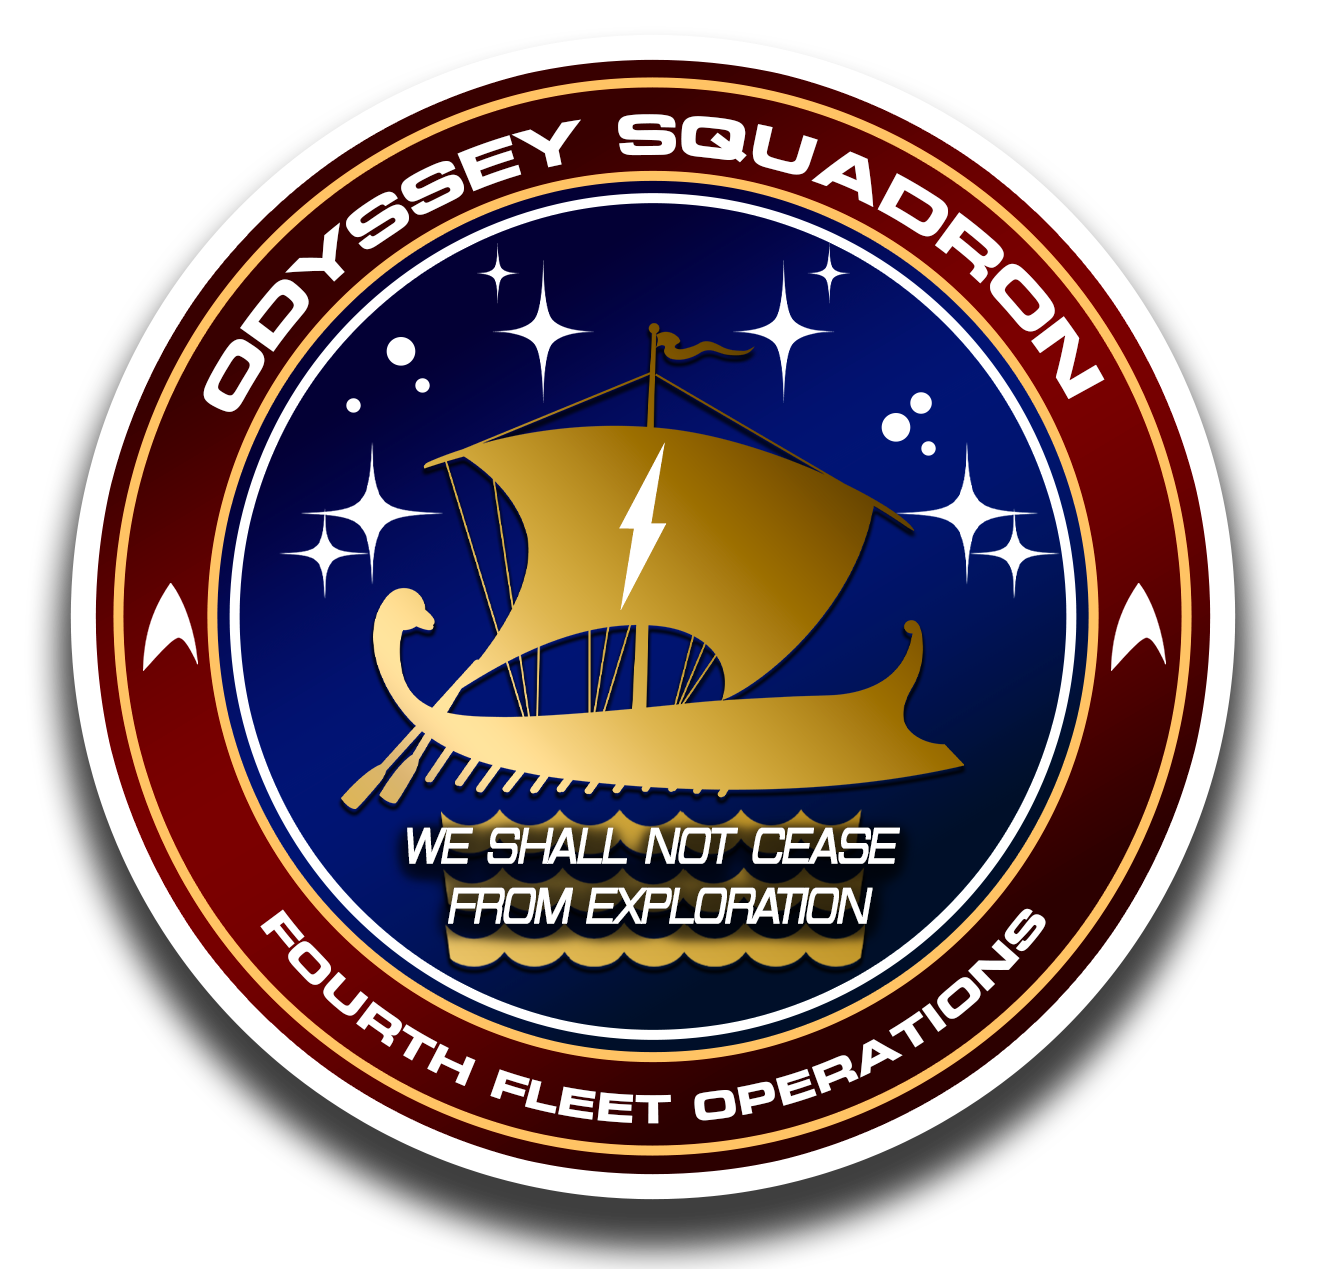 Odyssey squadron 1a.png